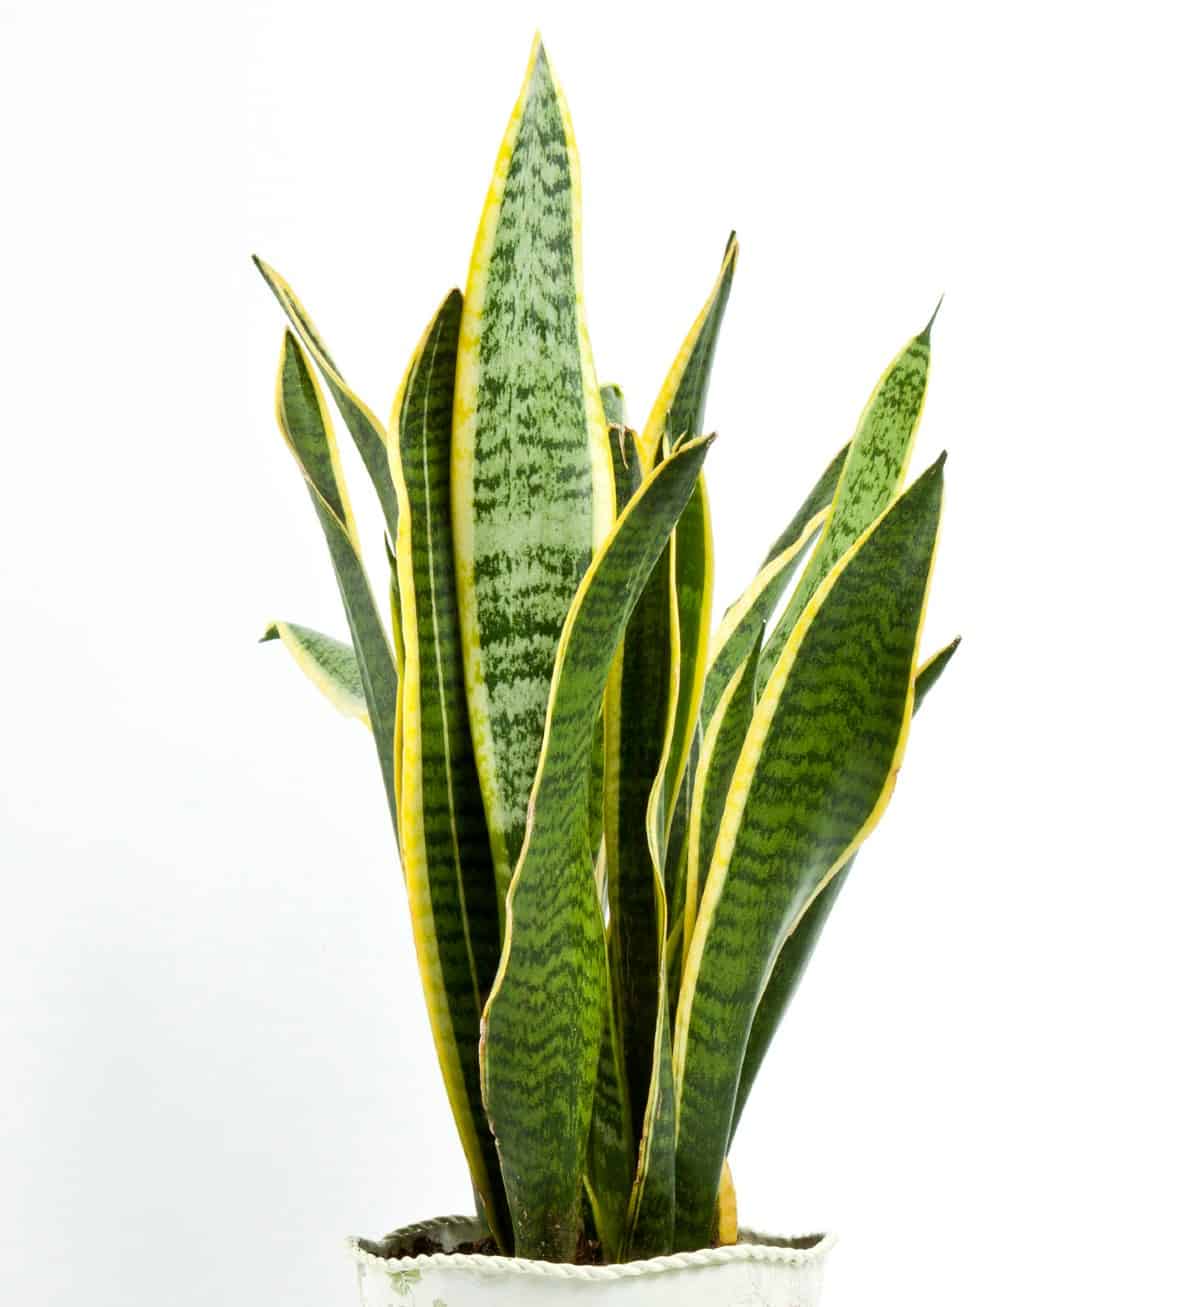 the snake plant is also called mother-in-law's tongue